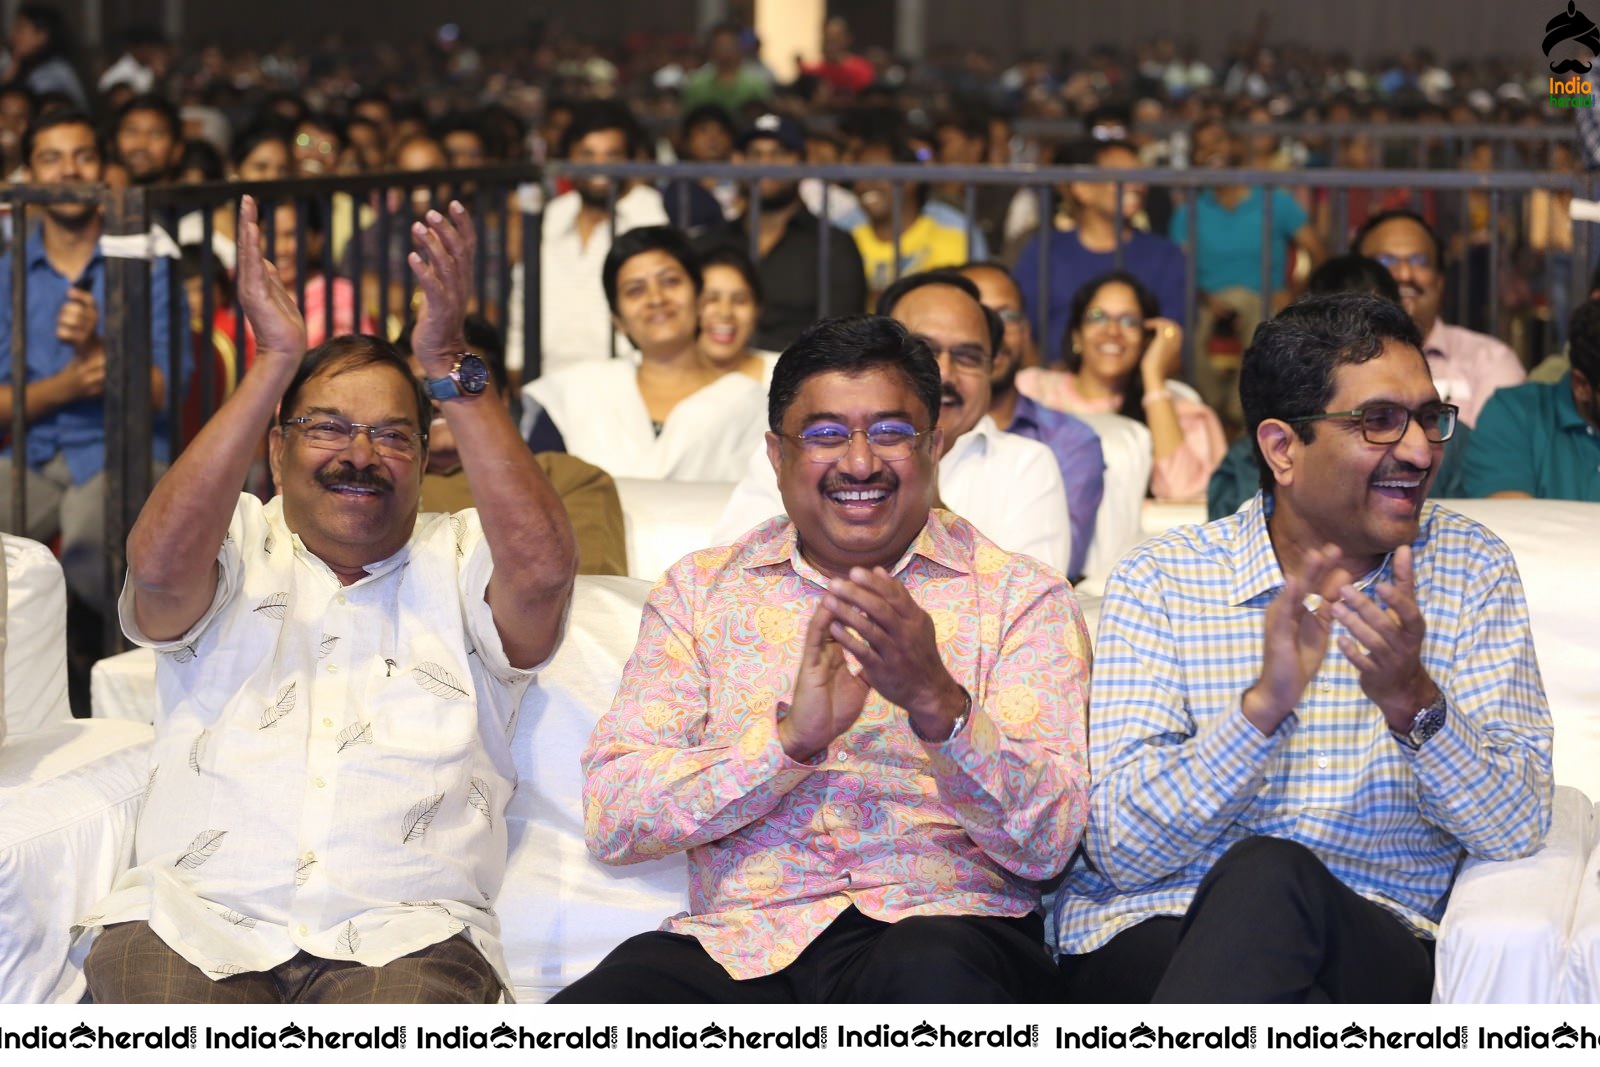 Cast and Crew of Tollywood Celebs who attended WFL event